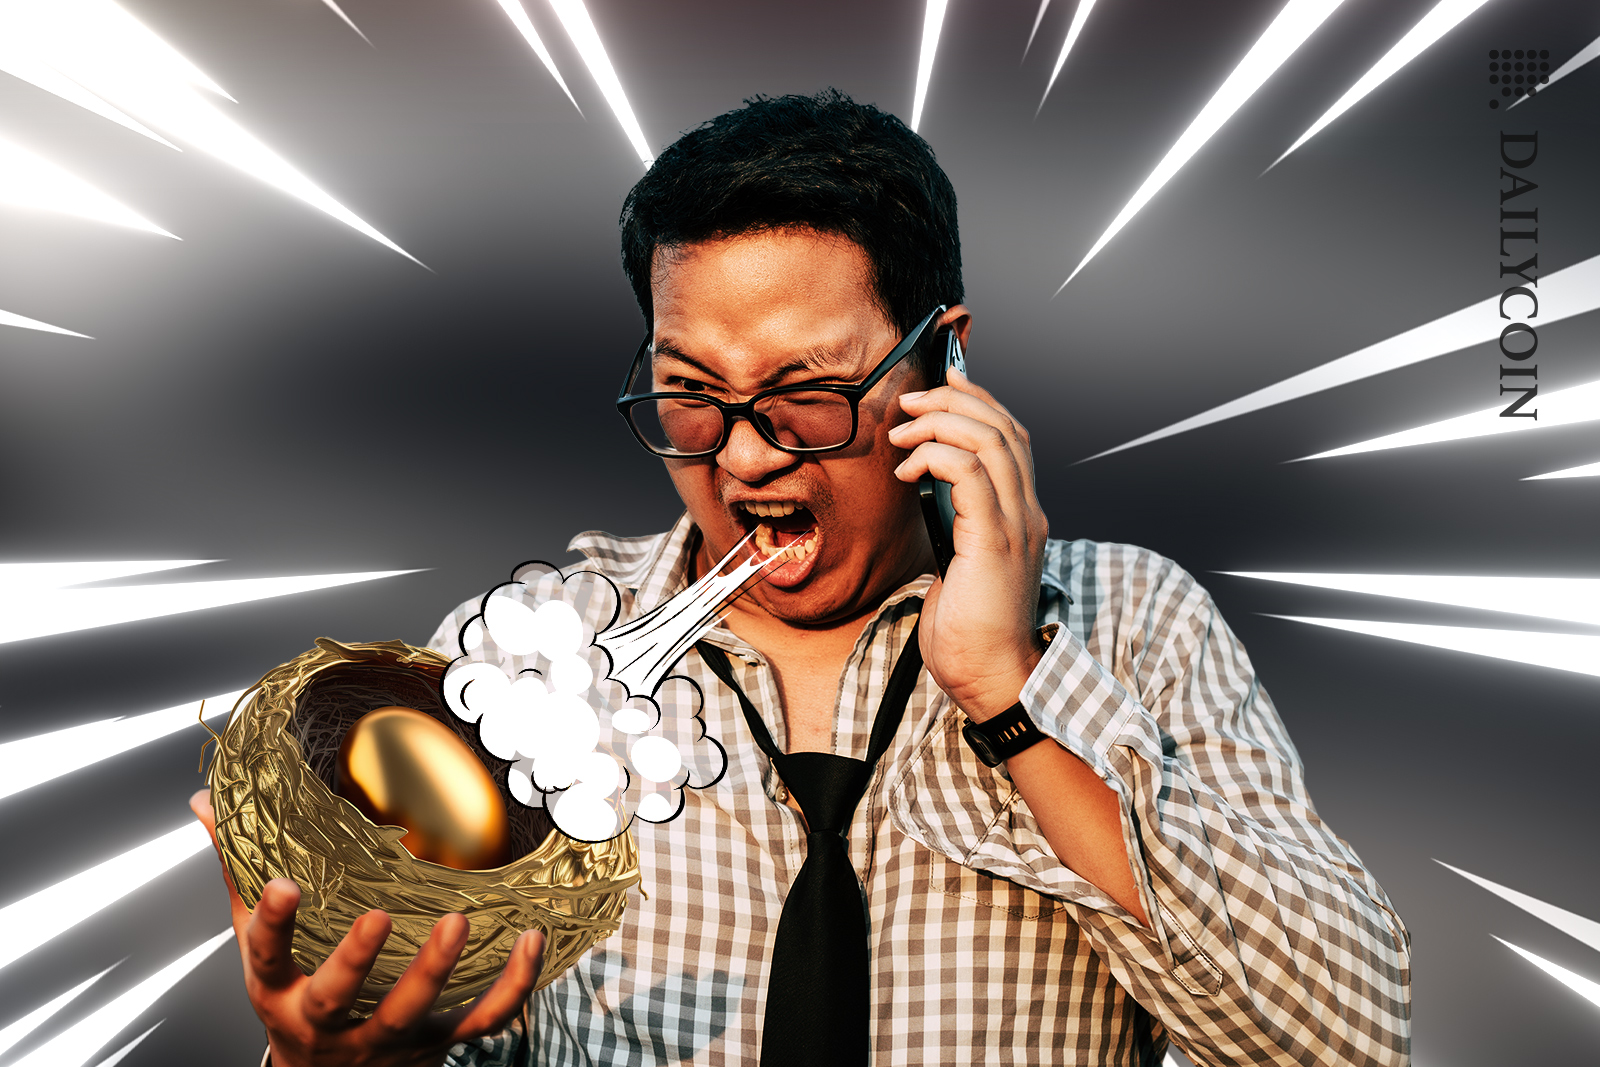 A man shouting on the phone while holding a golden egg nest surrounded by a cartoon beam with steam coming out of his mouth.